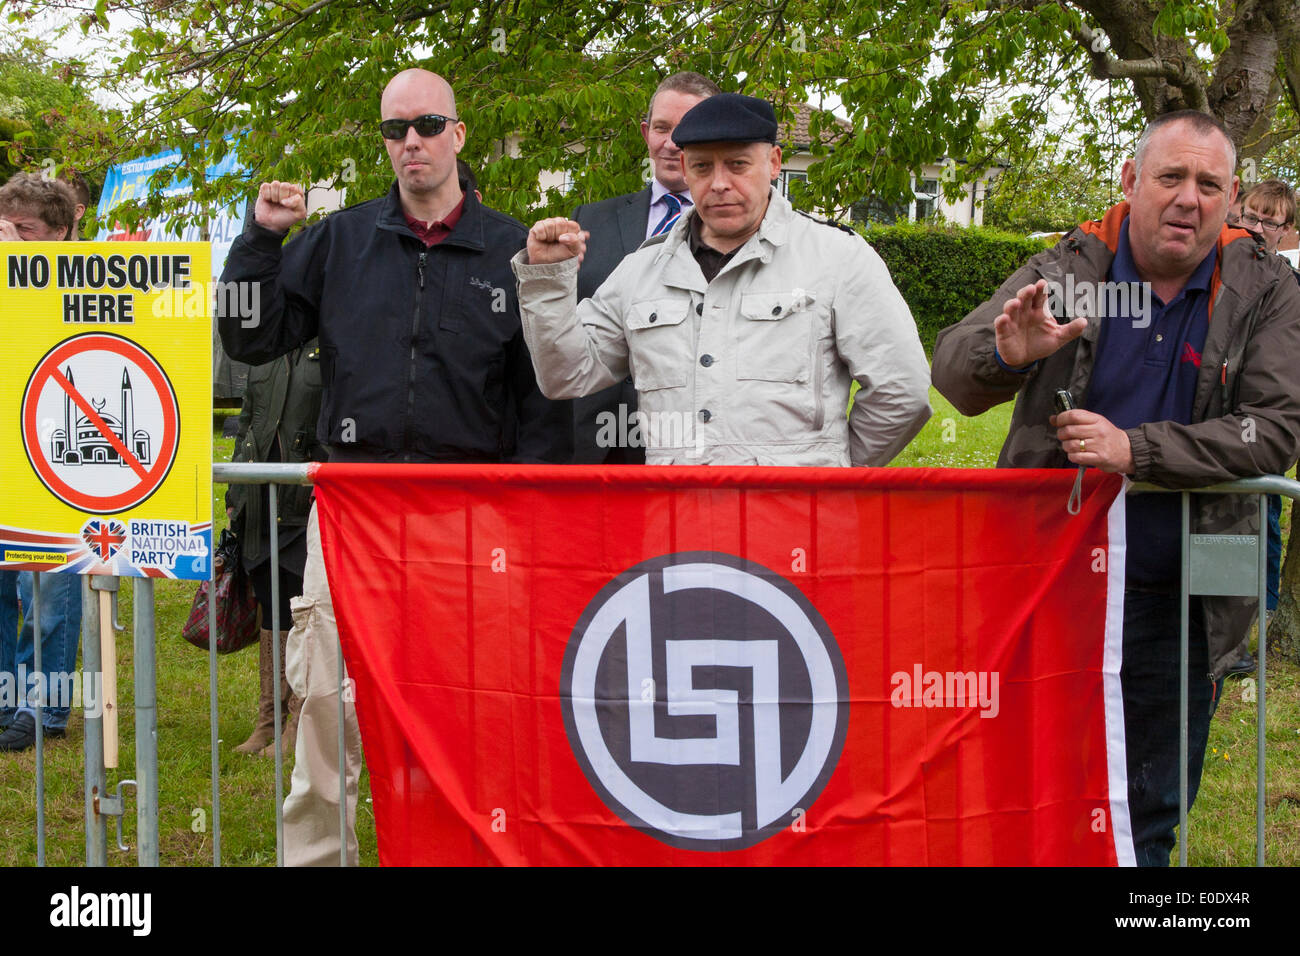 Hemel Hempstead, May 10th 2014. Members of the British Golden dawn pose with their apparently upside-down flag, against the possible establishment of a mosque on the site of a derelict church and community centre on Hemel Hempstead's Barnacres Road. Credit:  Paul Davey/Alamy Live News Stock Photo